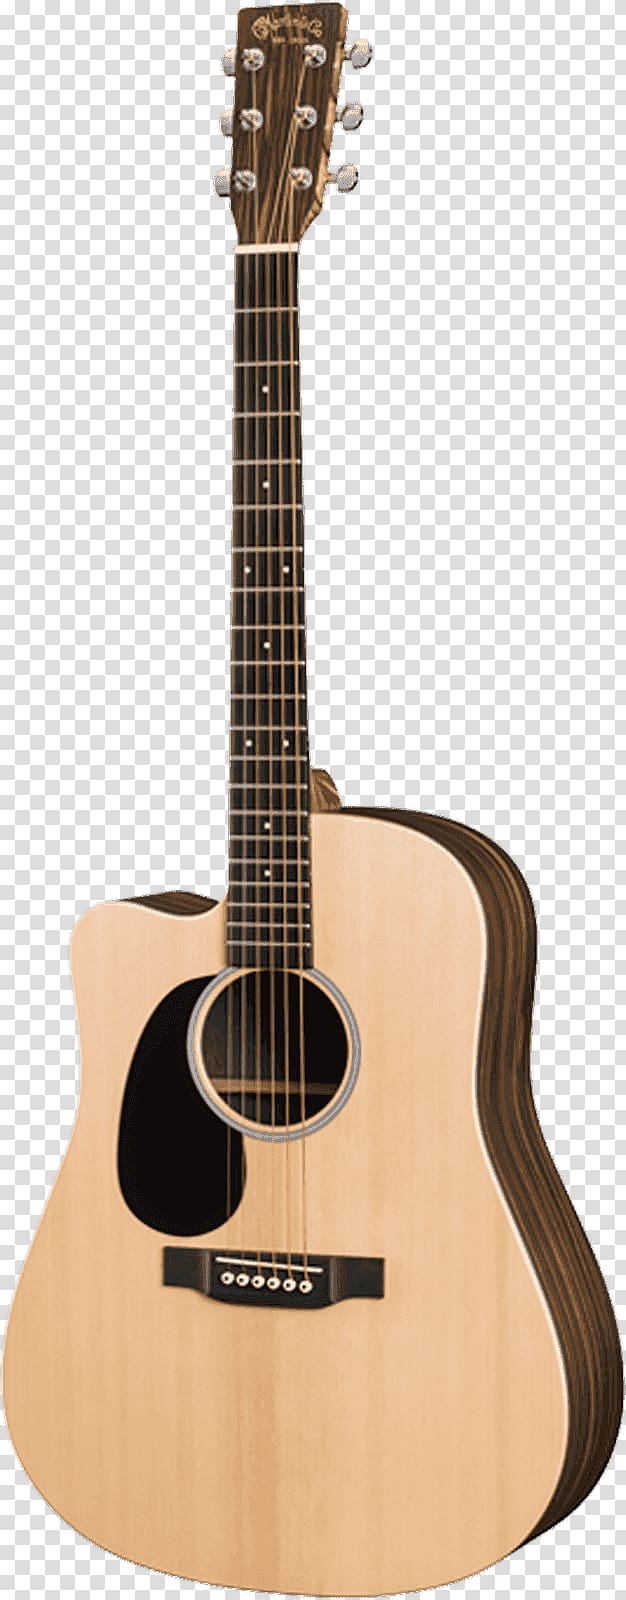 Acoustic-electric guitar Dreadnought Steel-string acoustic guitar, folk-custom transparent background PNG clipart